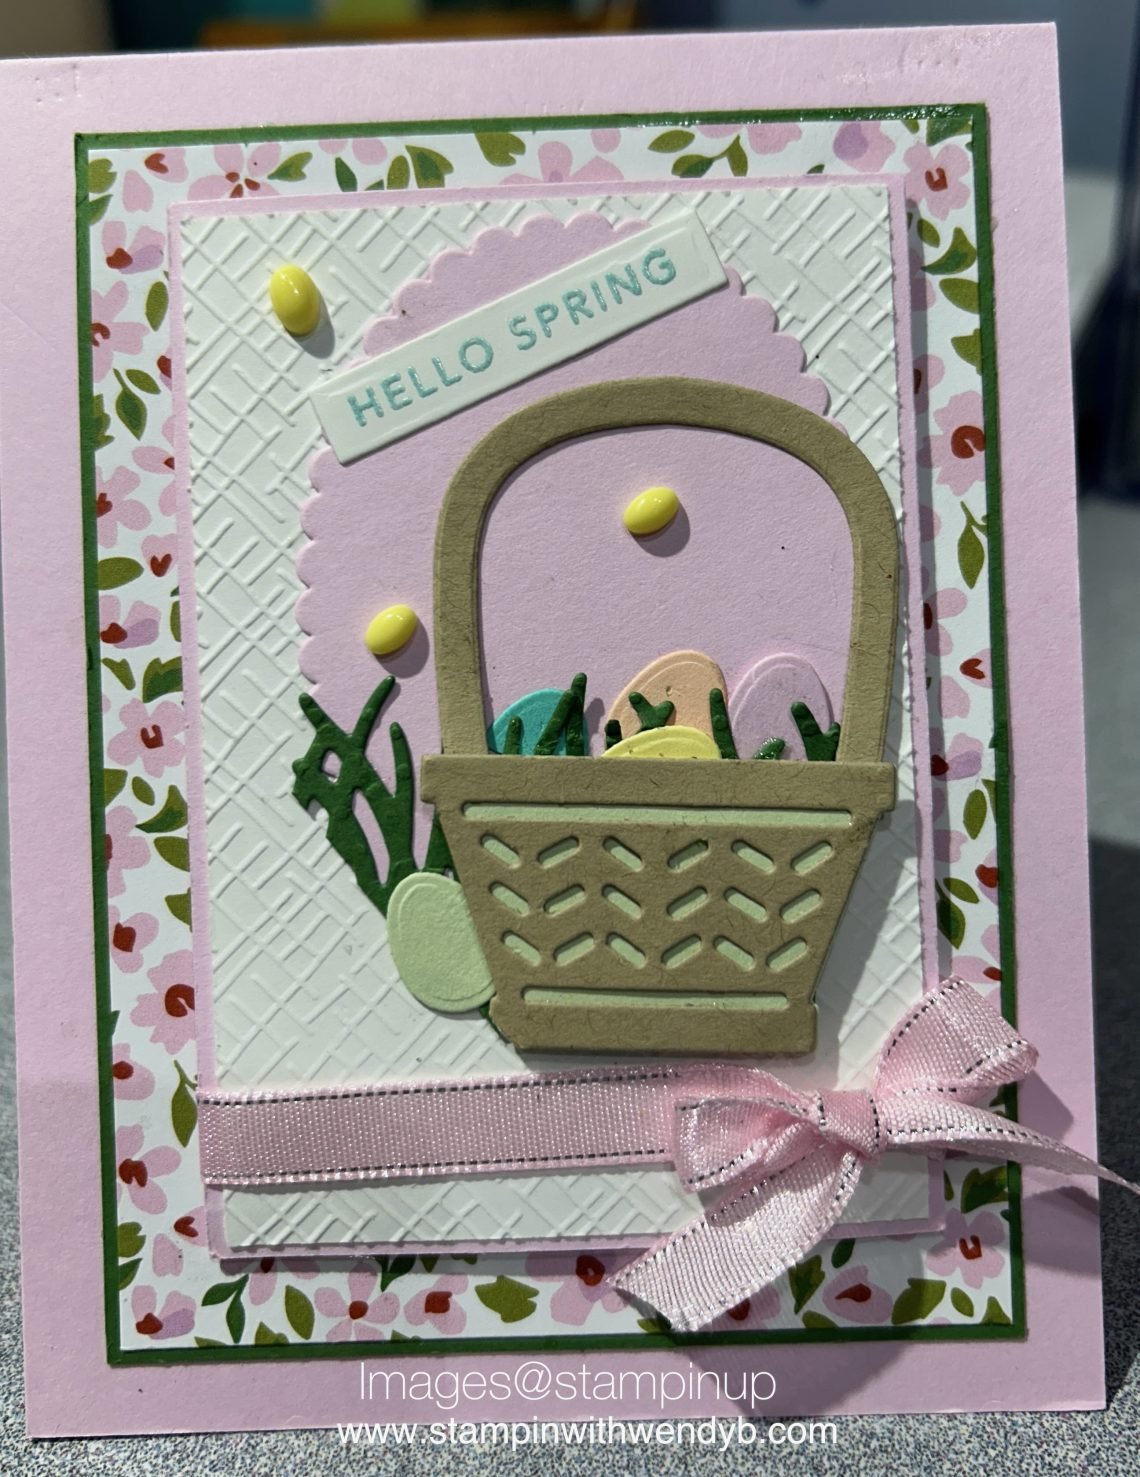 Basket Bunch is a retired set but I thought it was very cute to make this card in class.